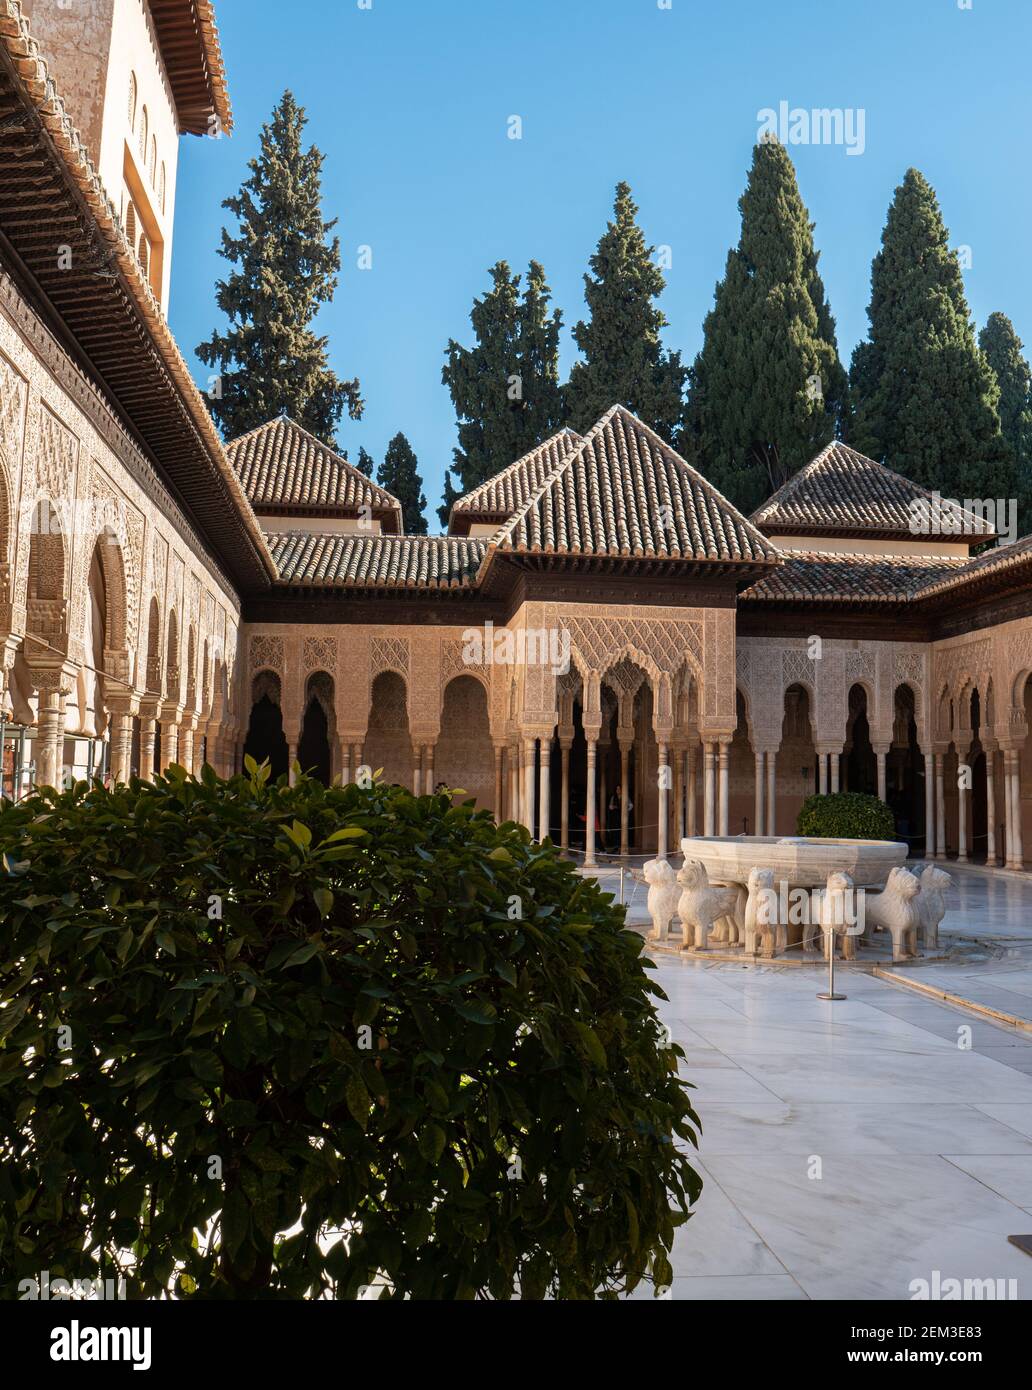 The Court of The Lions at The Alhambra, Granada, Spain. Stock Photo